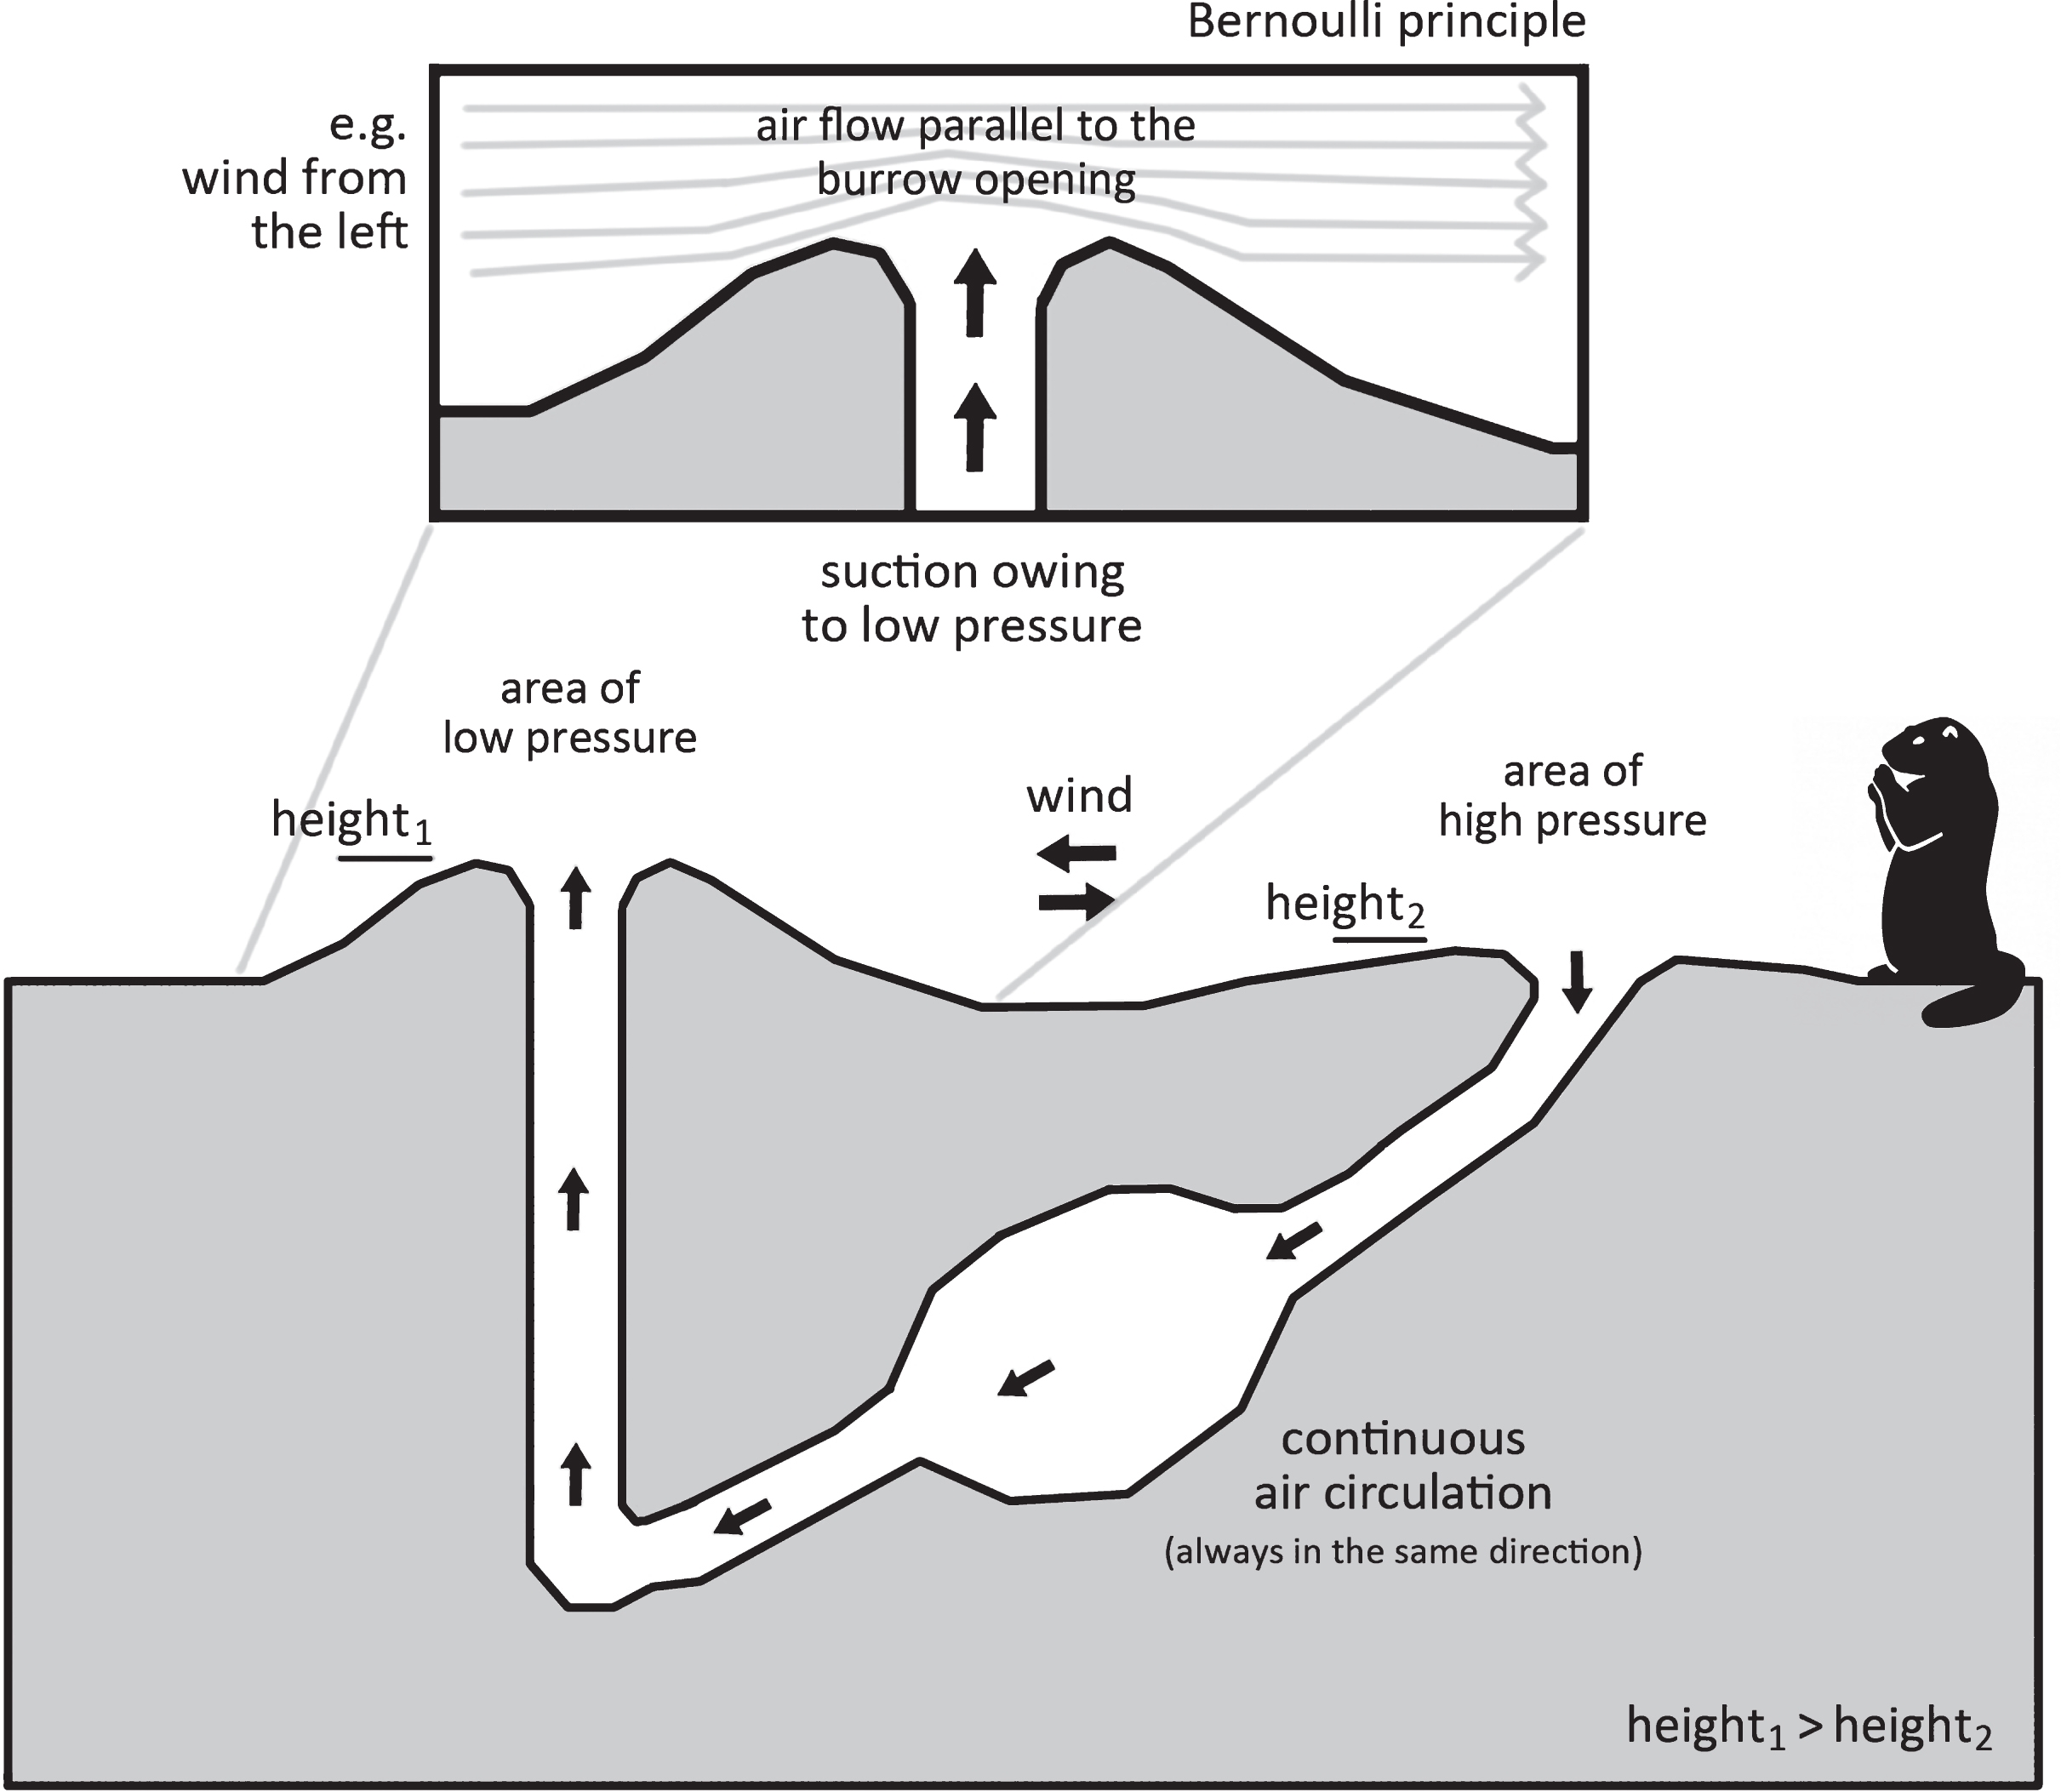 The principle of air circulation within a prairie dog burrow (applies to Cynomys ludovicianus). Illustration: Michael J. Paar according to Steven Vogel.